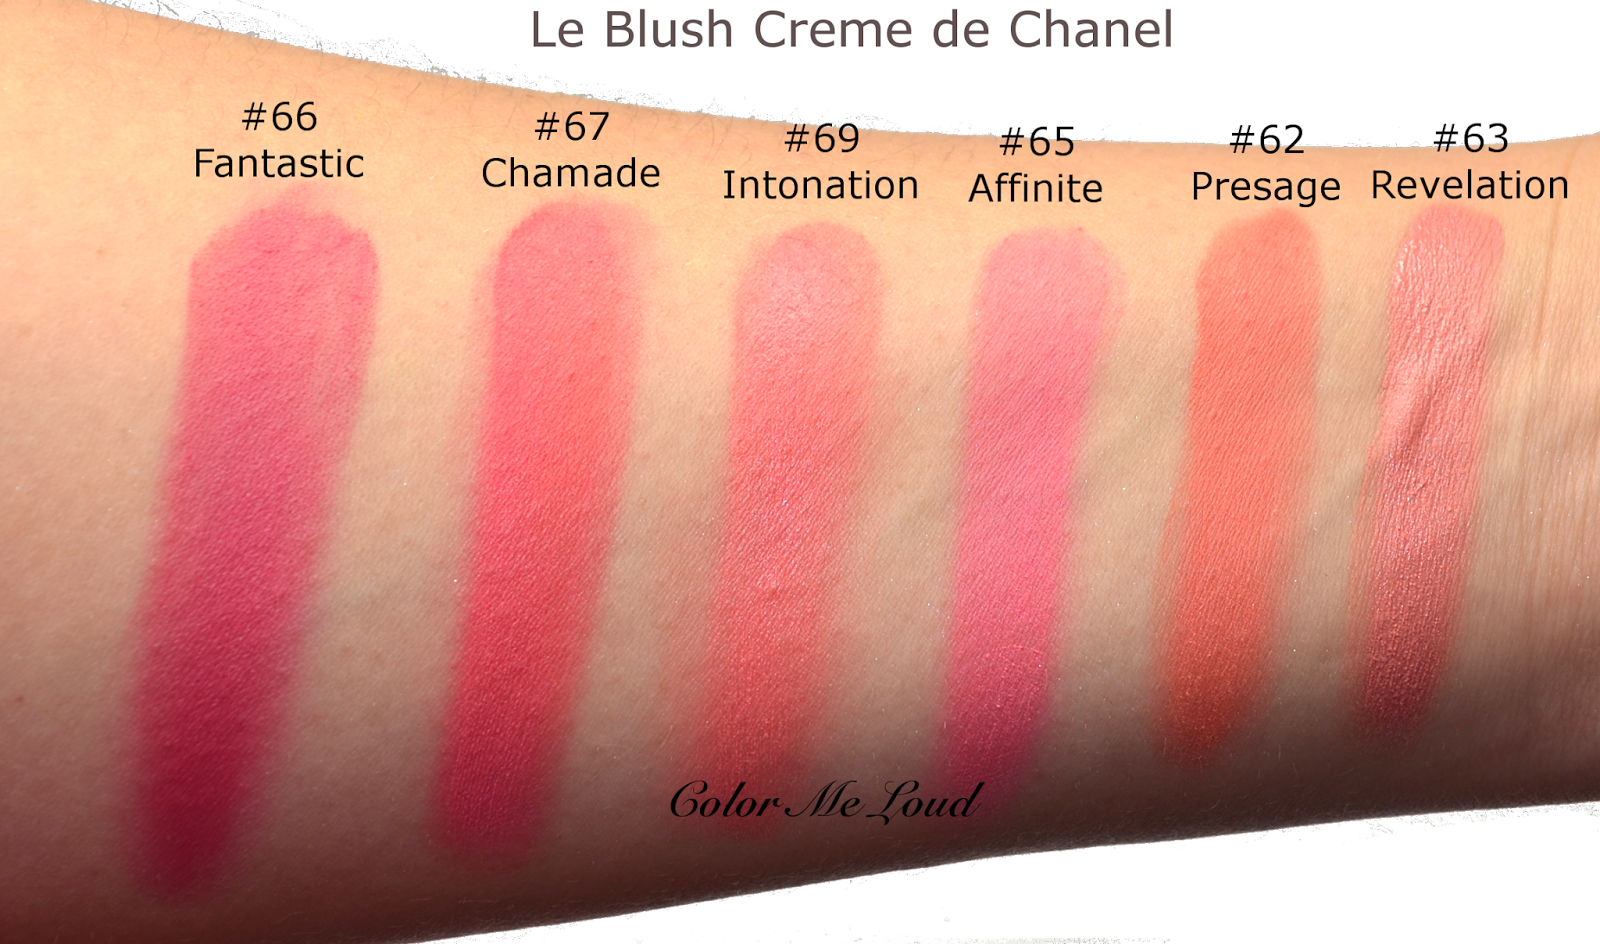 REVIEW: Le Blush Creme de Chanel – Chanel Cream Blush in 63 “Revelation”, Daily Musings